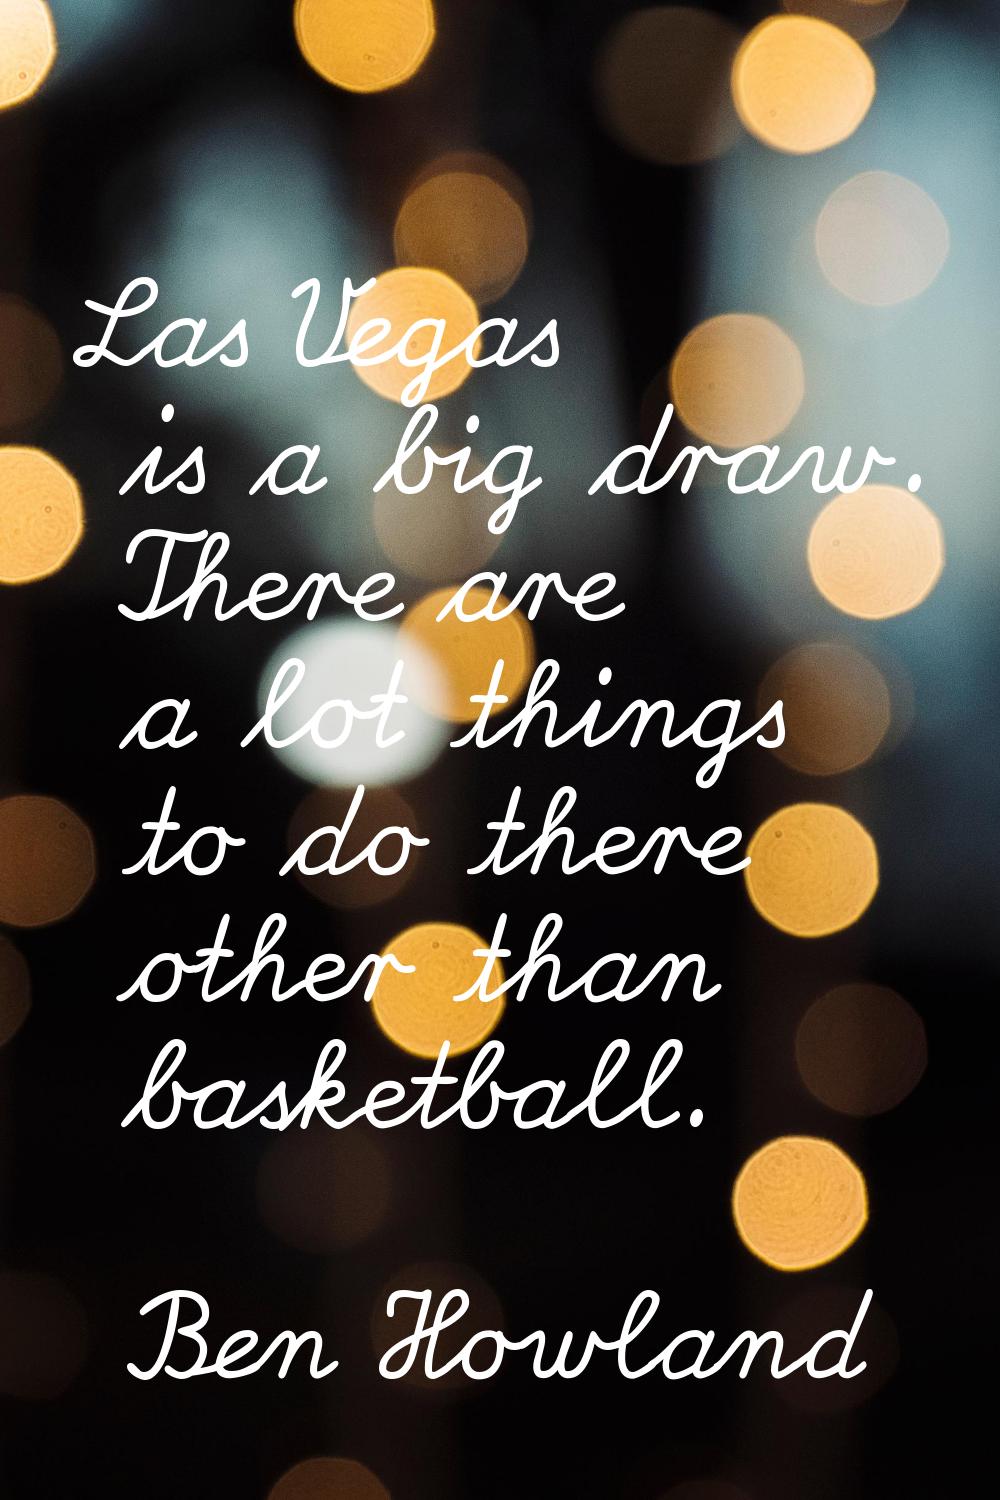 Las Vegas is a big draw. There are a lot things to do there other than basketball.